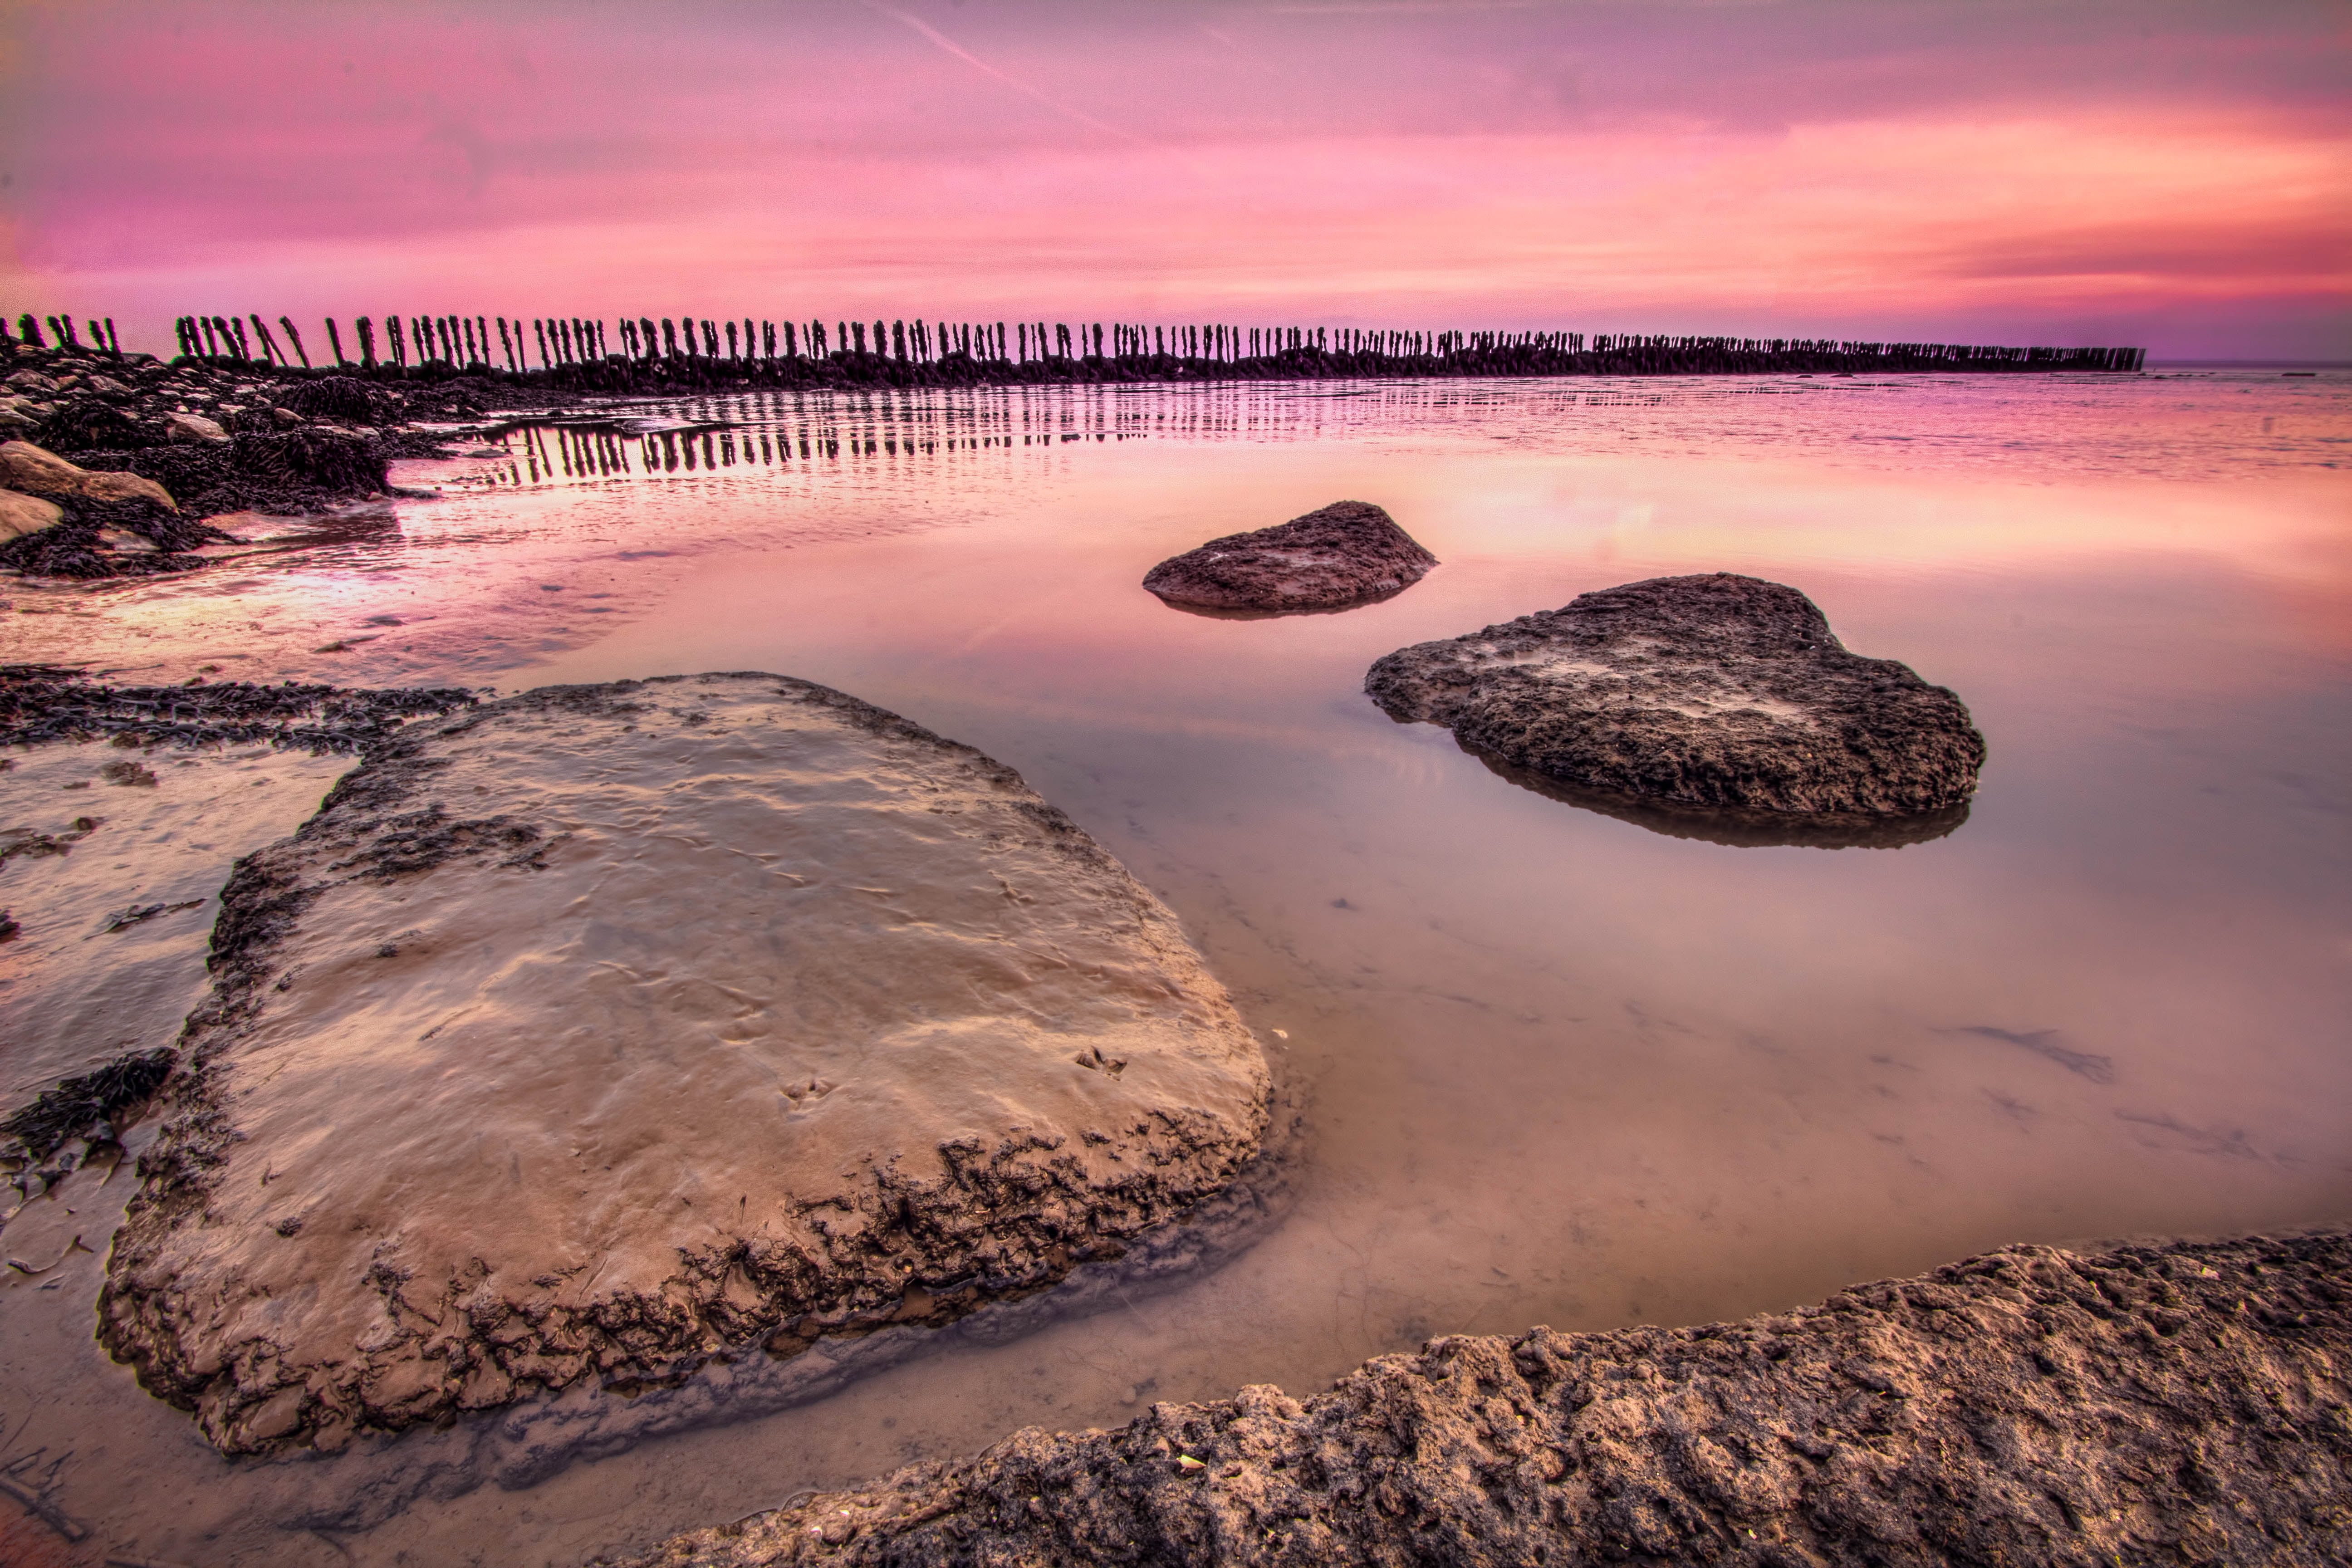 photography of rocks on body of water, Calm, st brides, hdr, beach